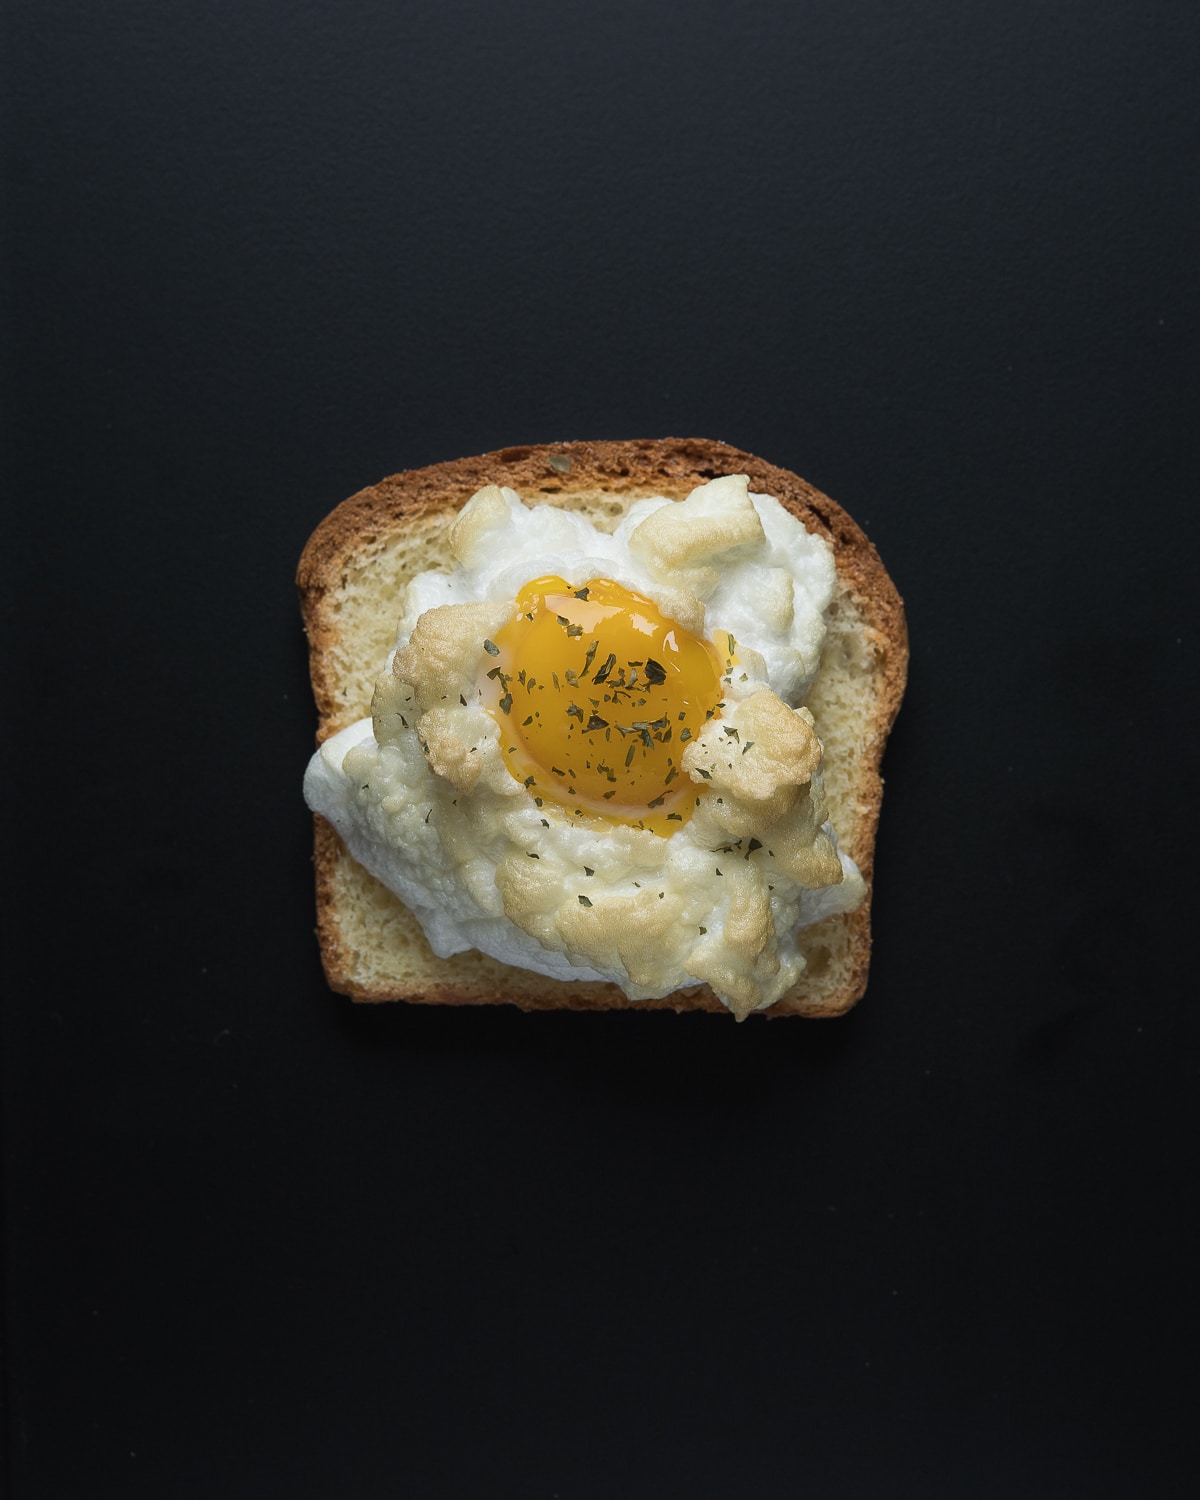 An overhead photo of cloud eggs on toast - the background is entirely black.